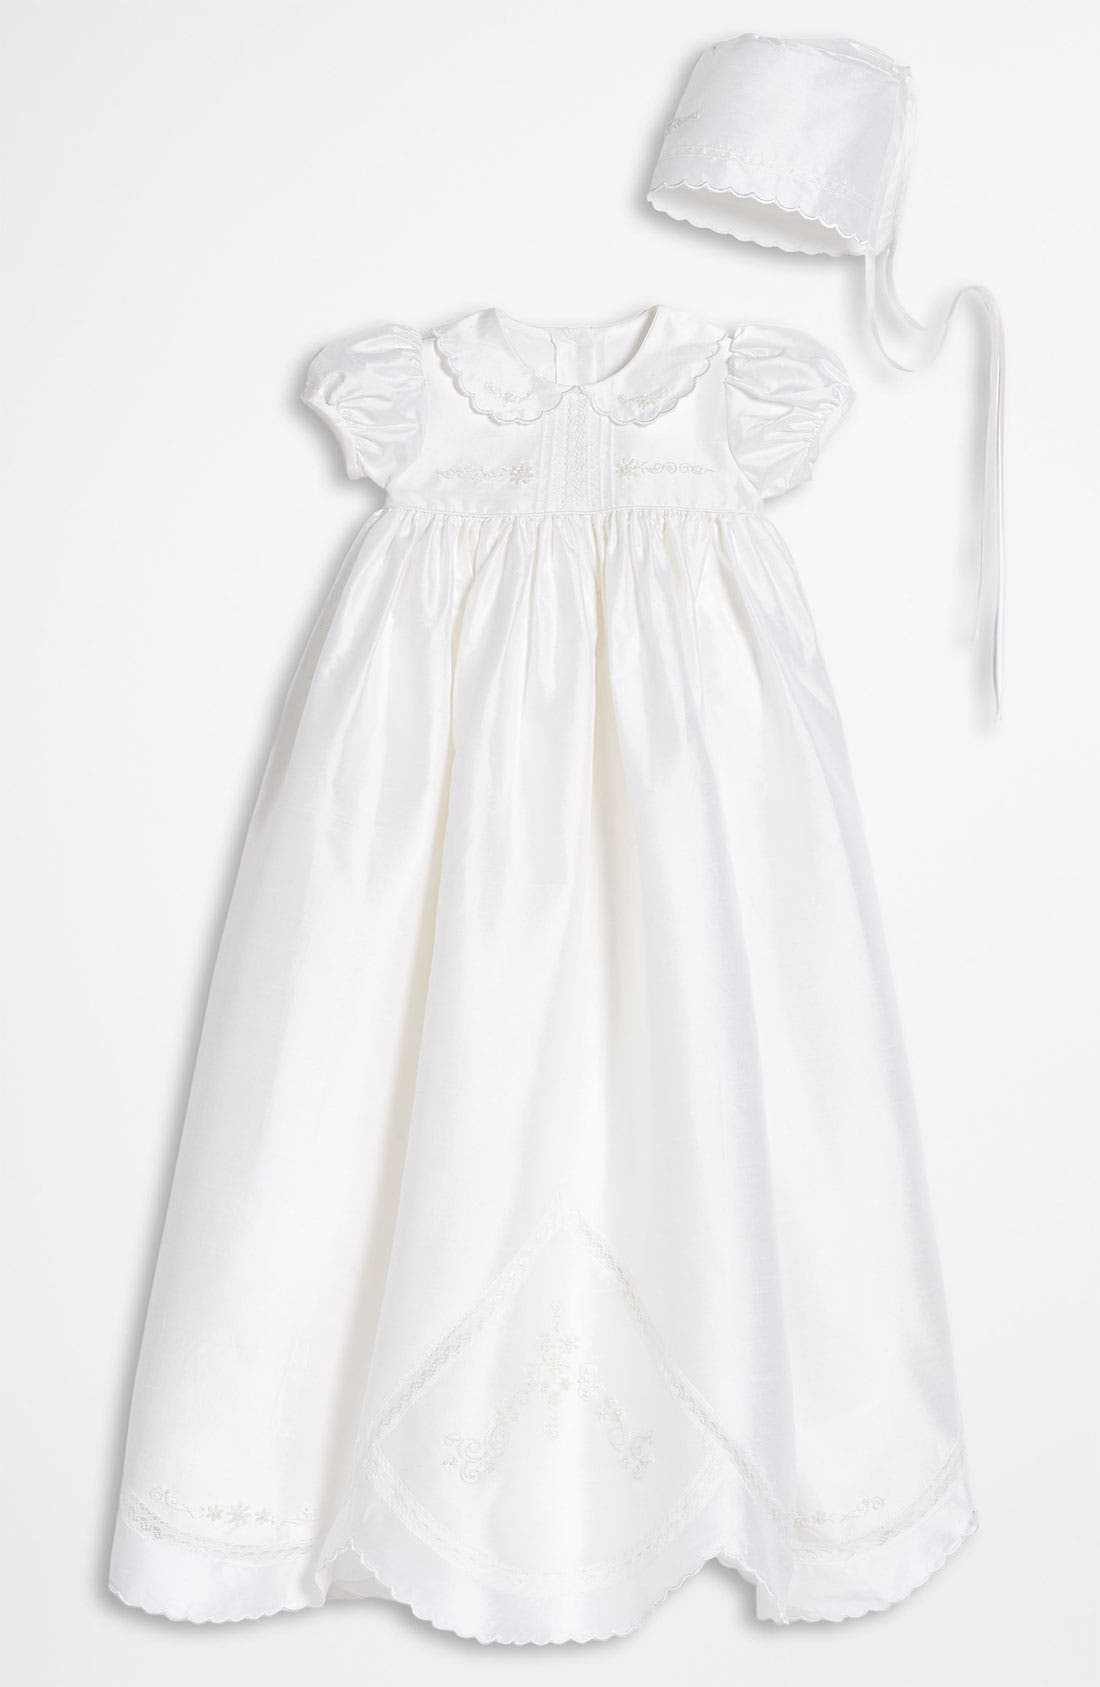 Little Things Mean A Lot Baby Girls White Bonnet Embroidered Christening Dress Outfit 